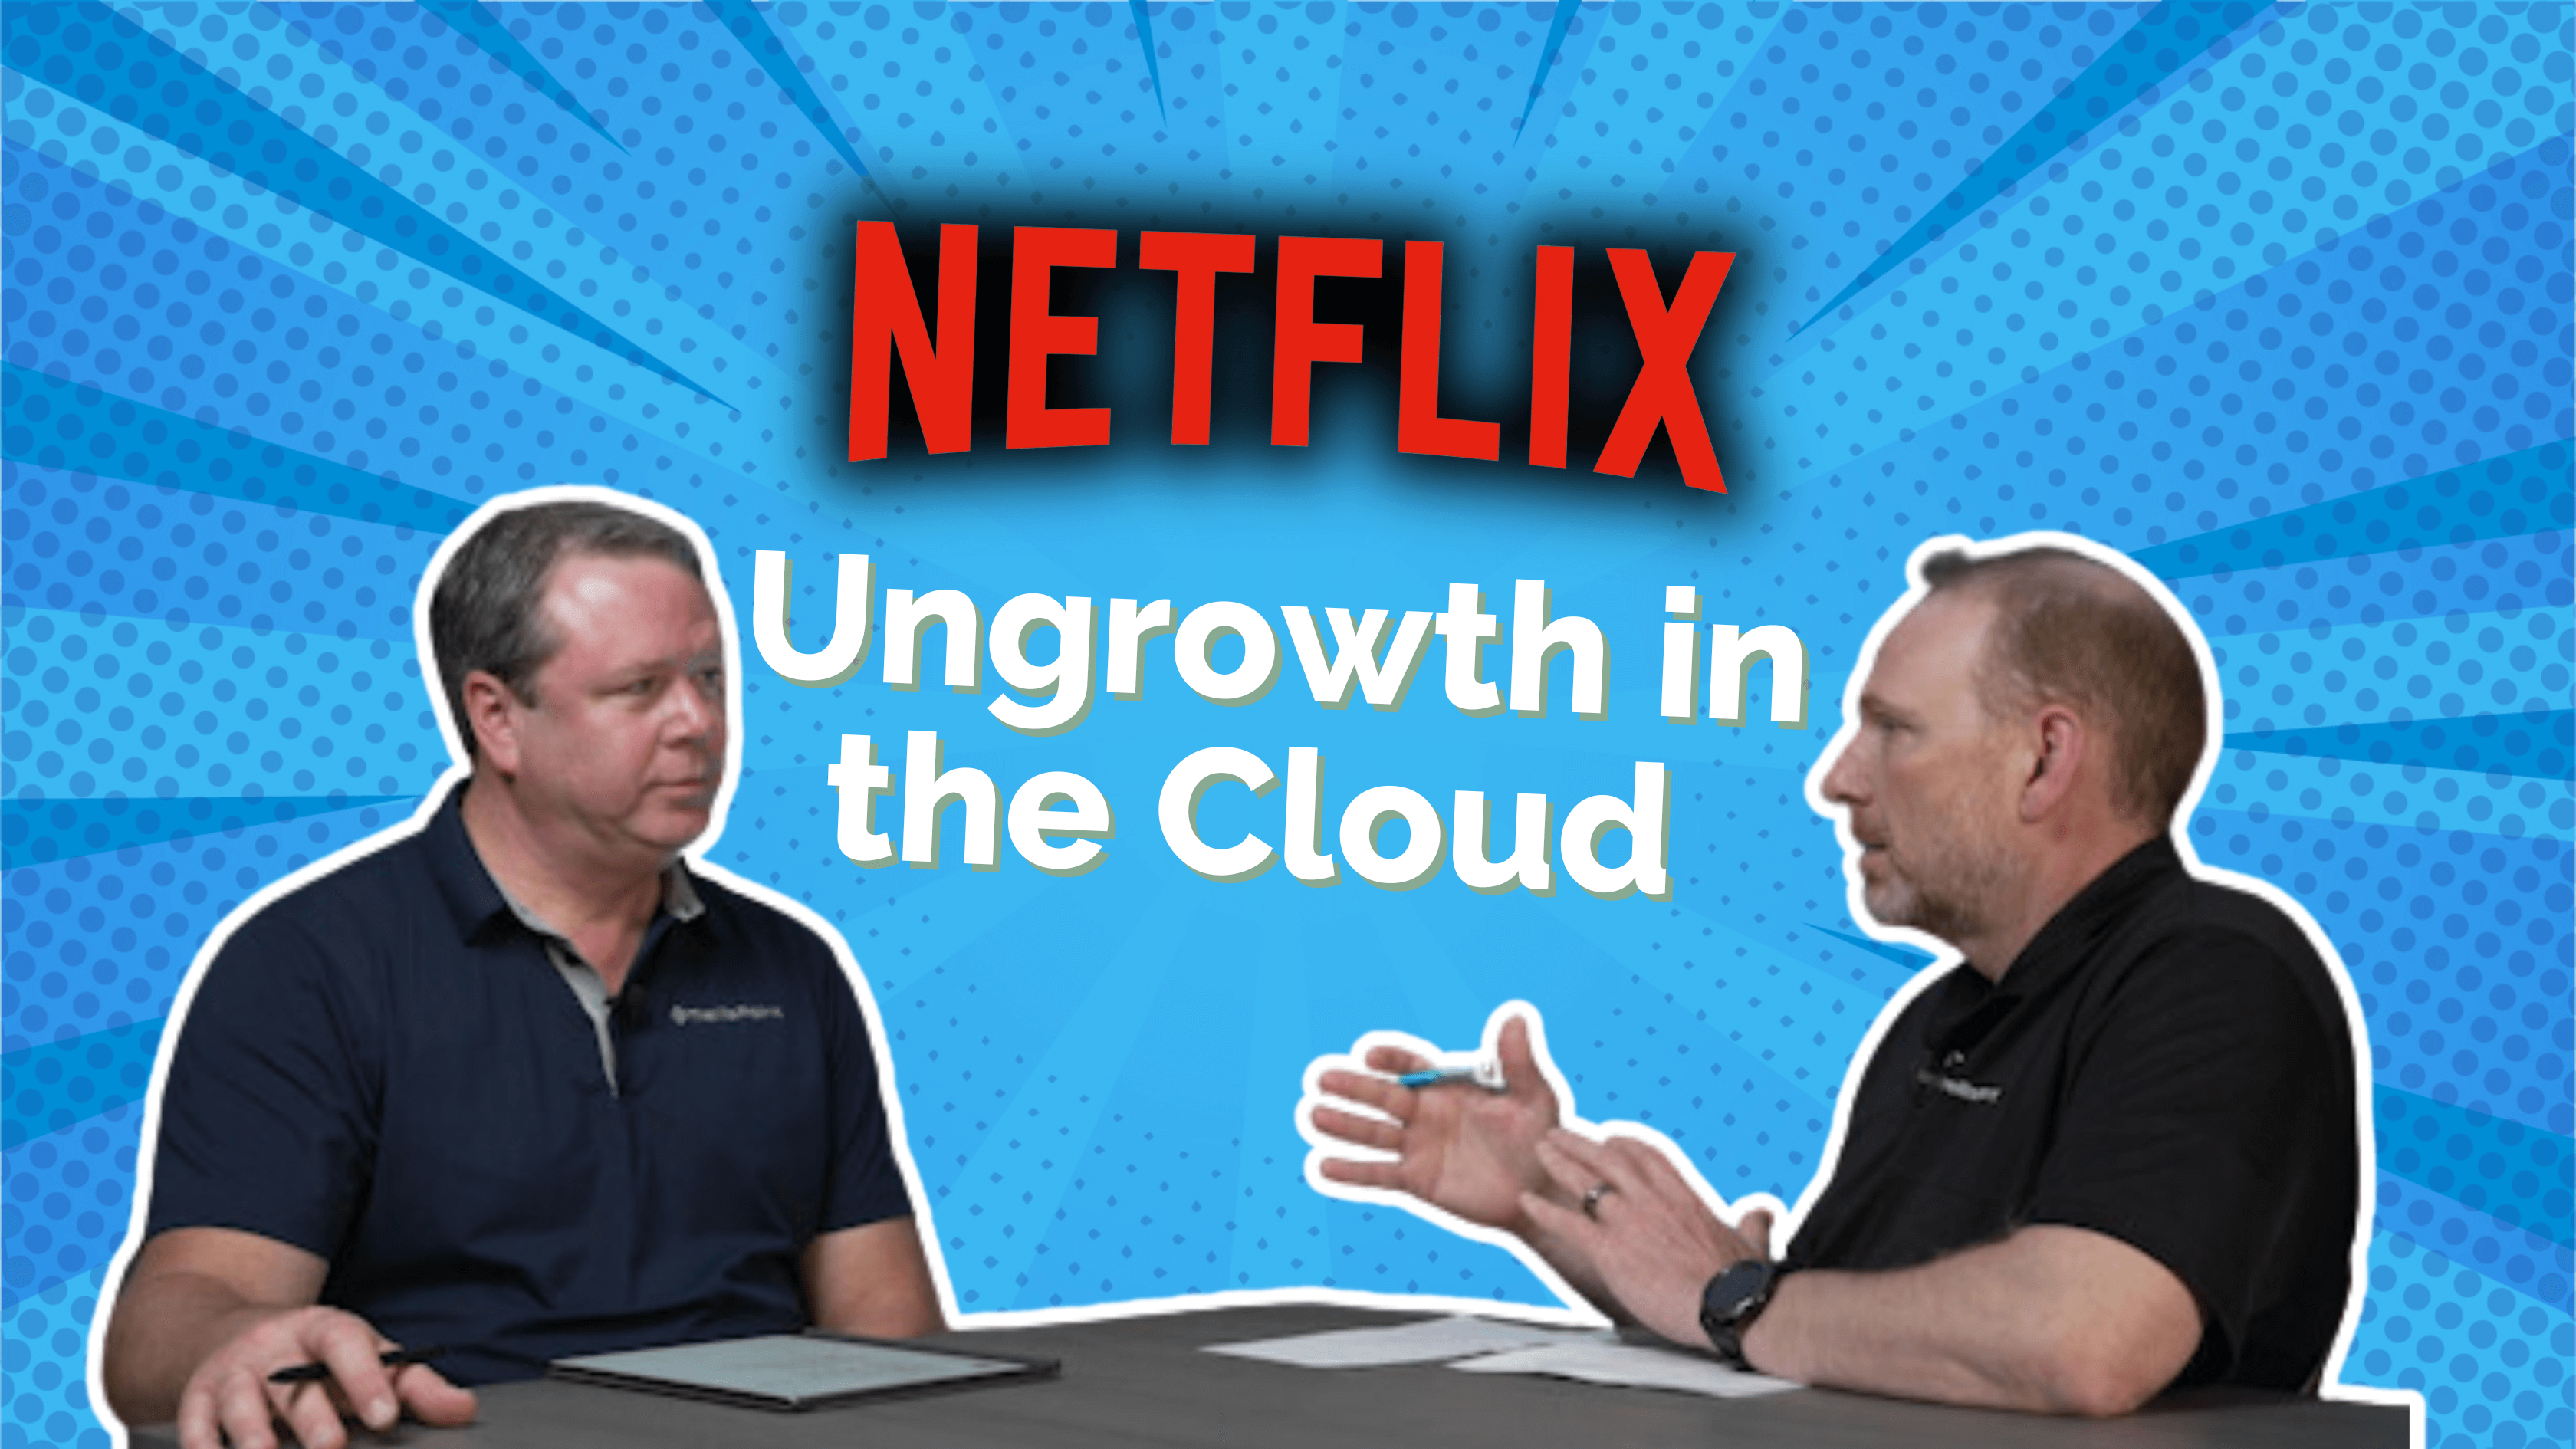 Netflix and their brush with Ungrowth in the cloud episode